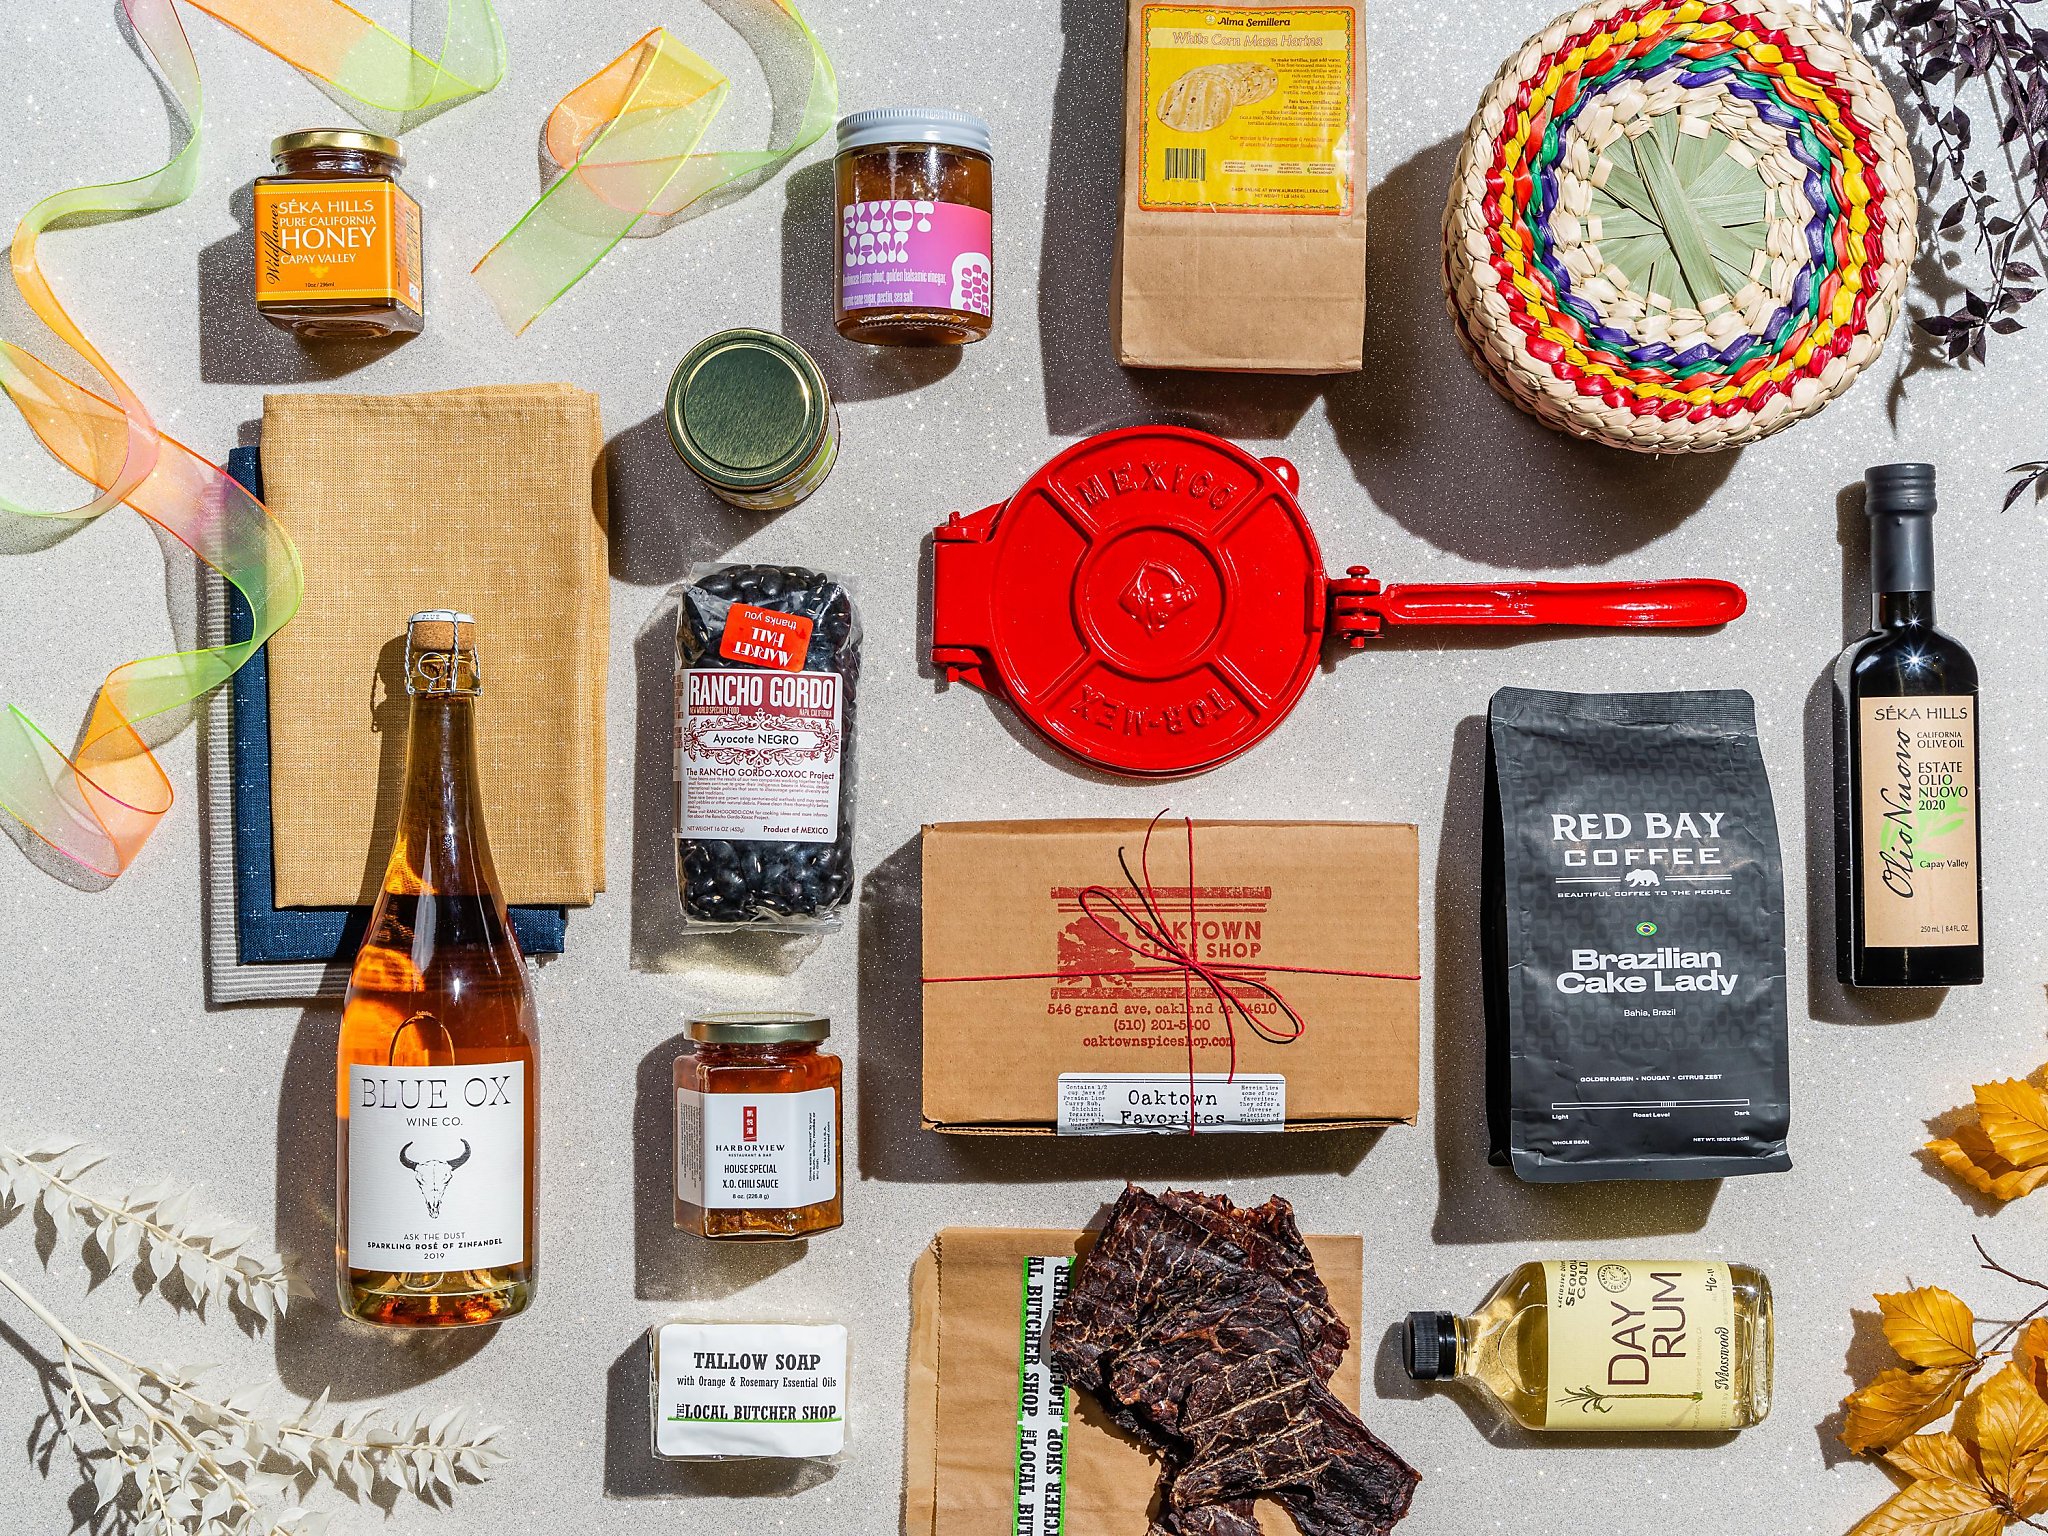 15 healthy holiday gifts to give during the COVID-19 pandemic